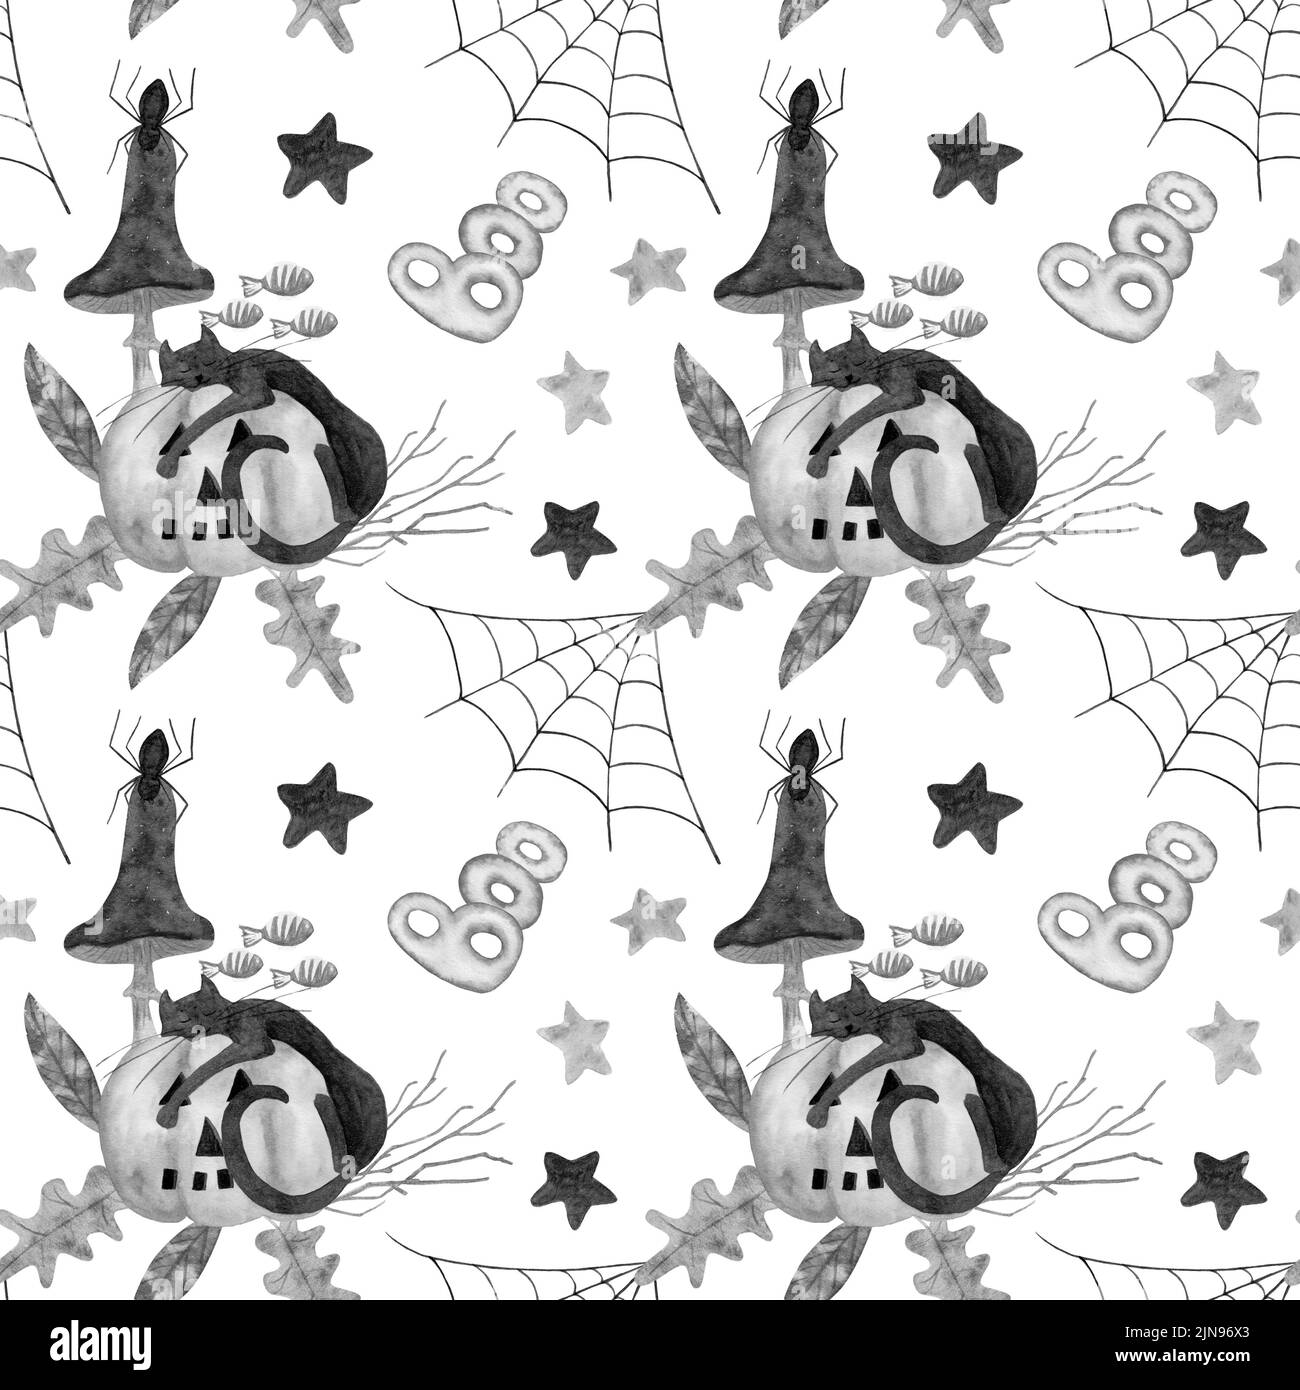 Halloween watercolor pattern with a sleeping cat on a pumpkin in the leaves and branches of trees, toadstool mushrooms and stars. Childrens pattern Stock Photo